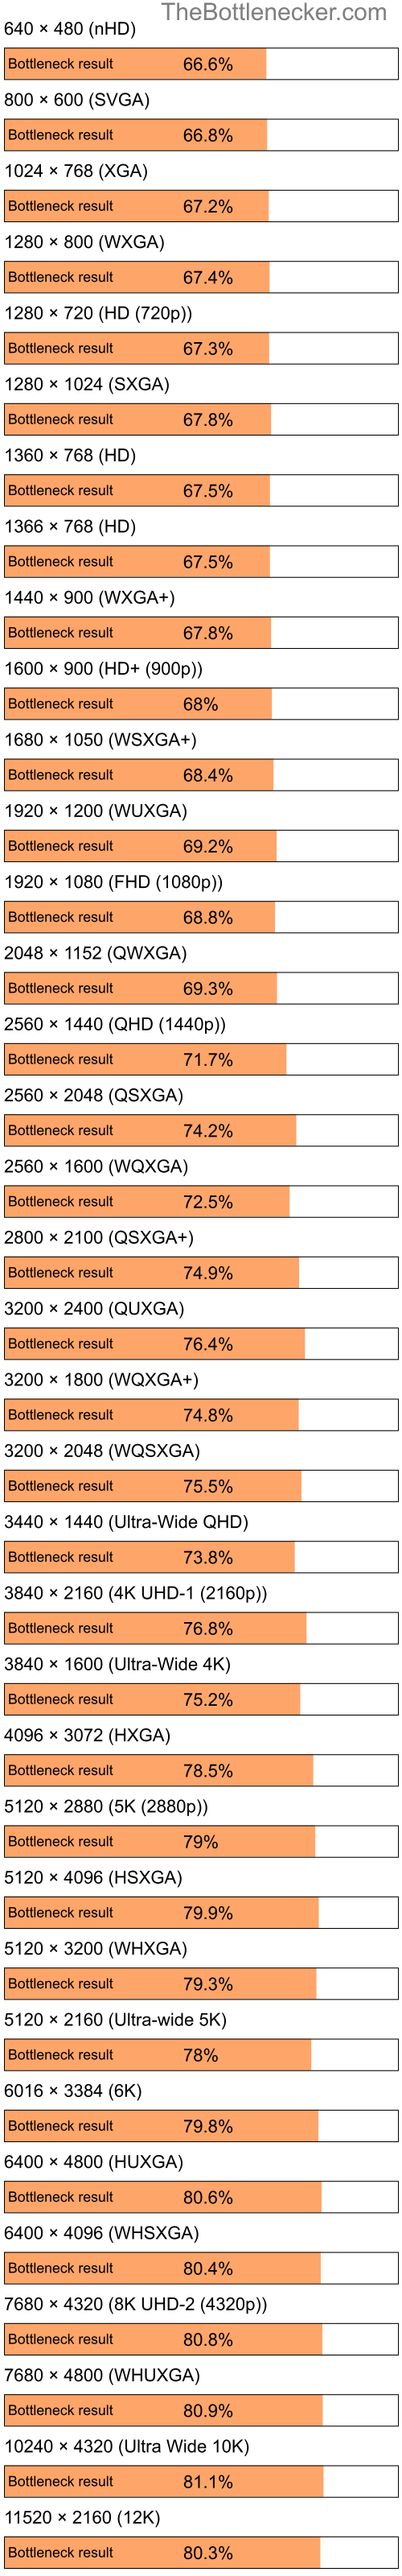 Bottleneck results by resolution for Intel Pentium 4 and AMD Radeon 3000 in Graphic Card Intense Tasks